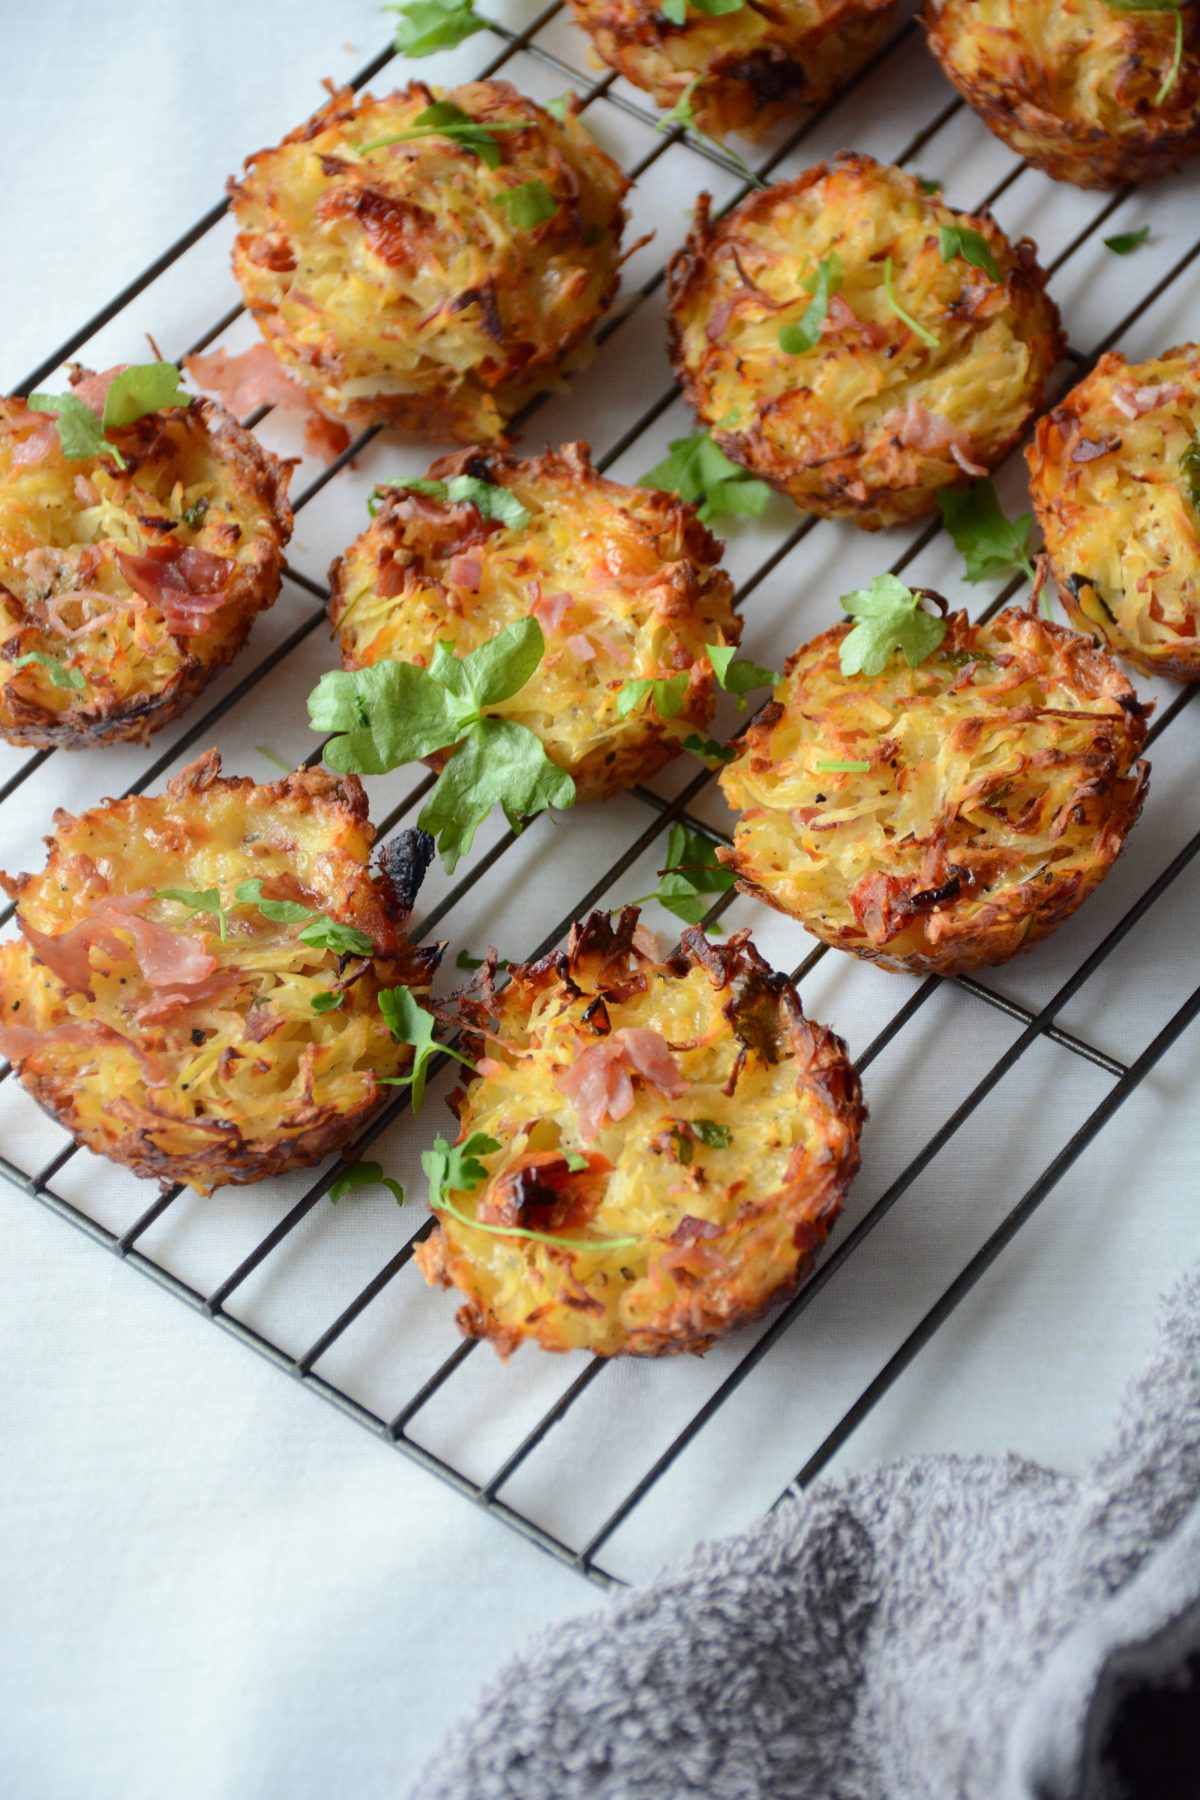 Hashbrown Muffins with Ham, Cheese and Sundried Tomatoes - a savoury kid friendly snack perfect for lunch boxes and parties alike - thespiceadventuress.com